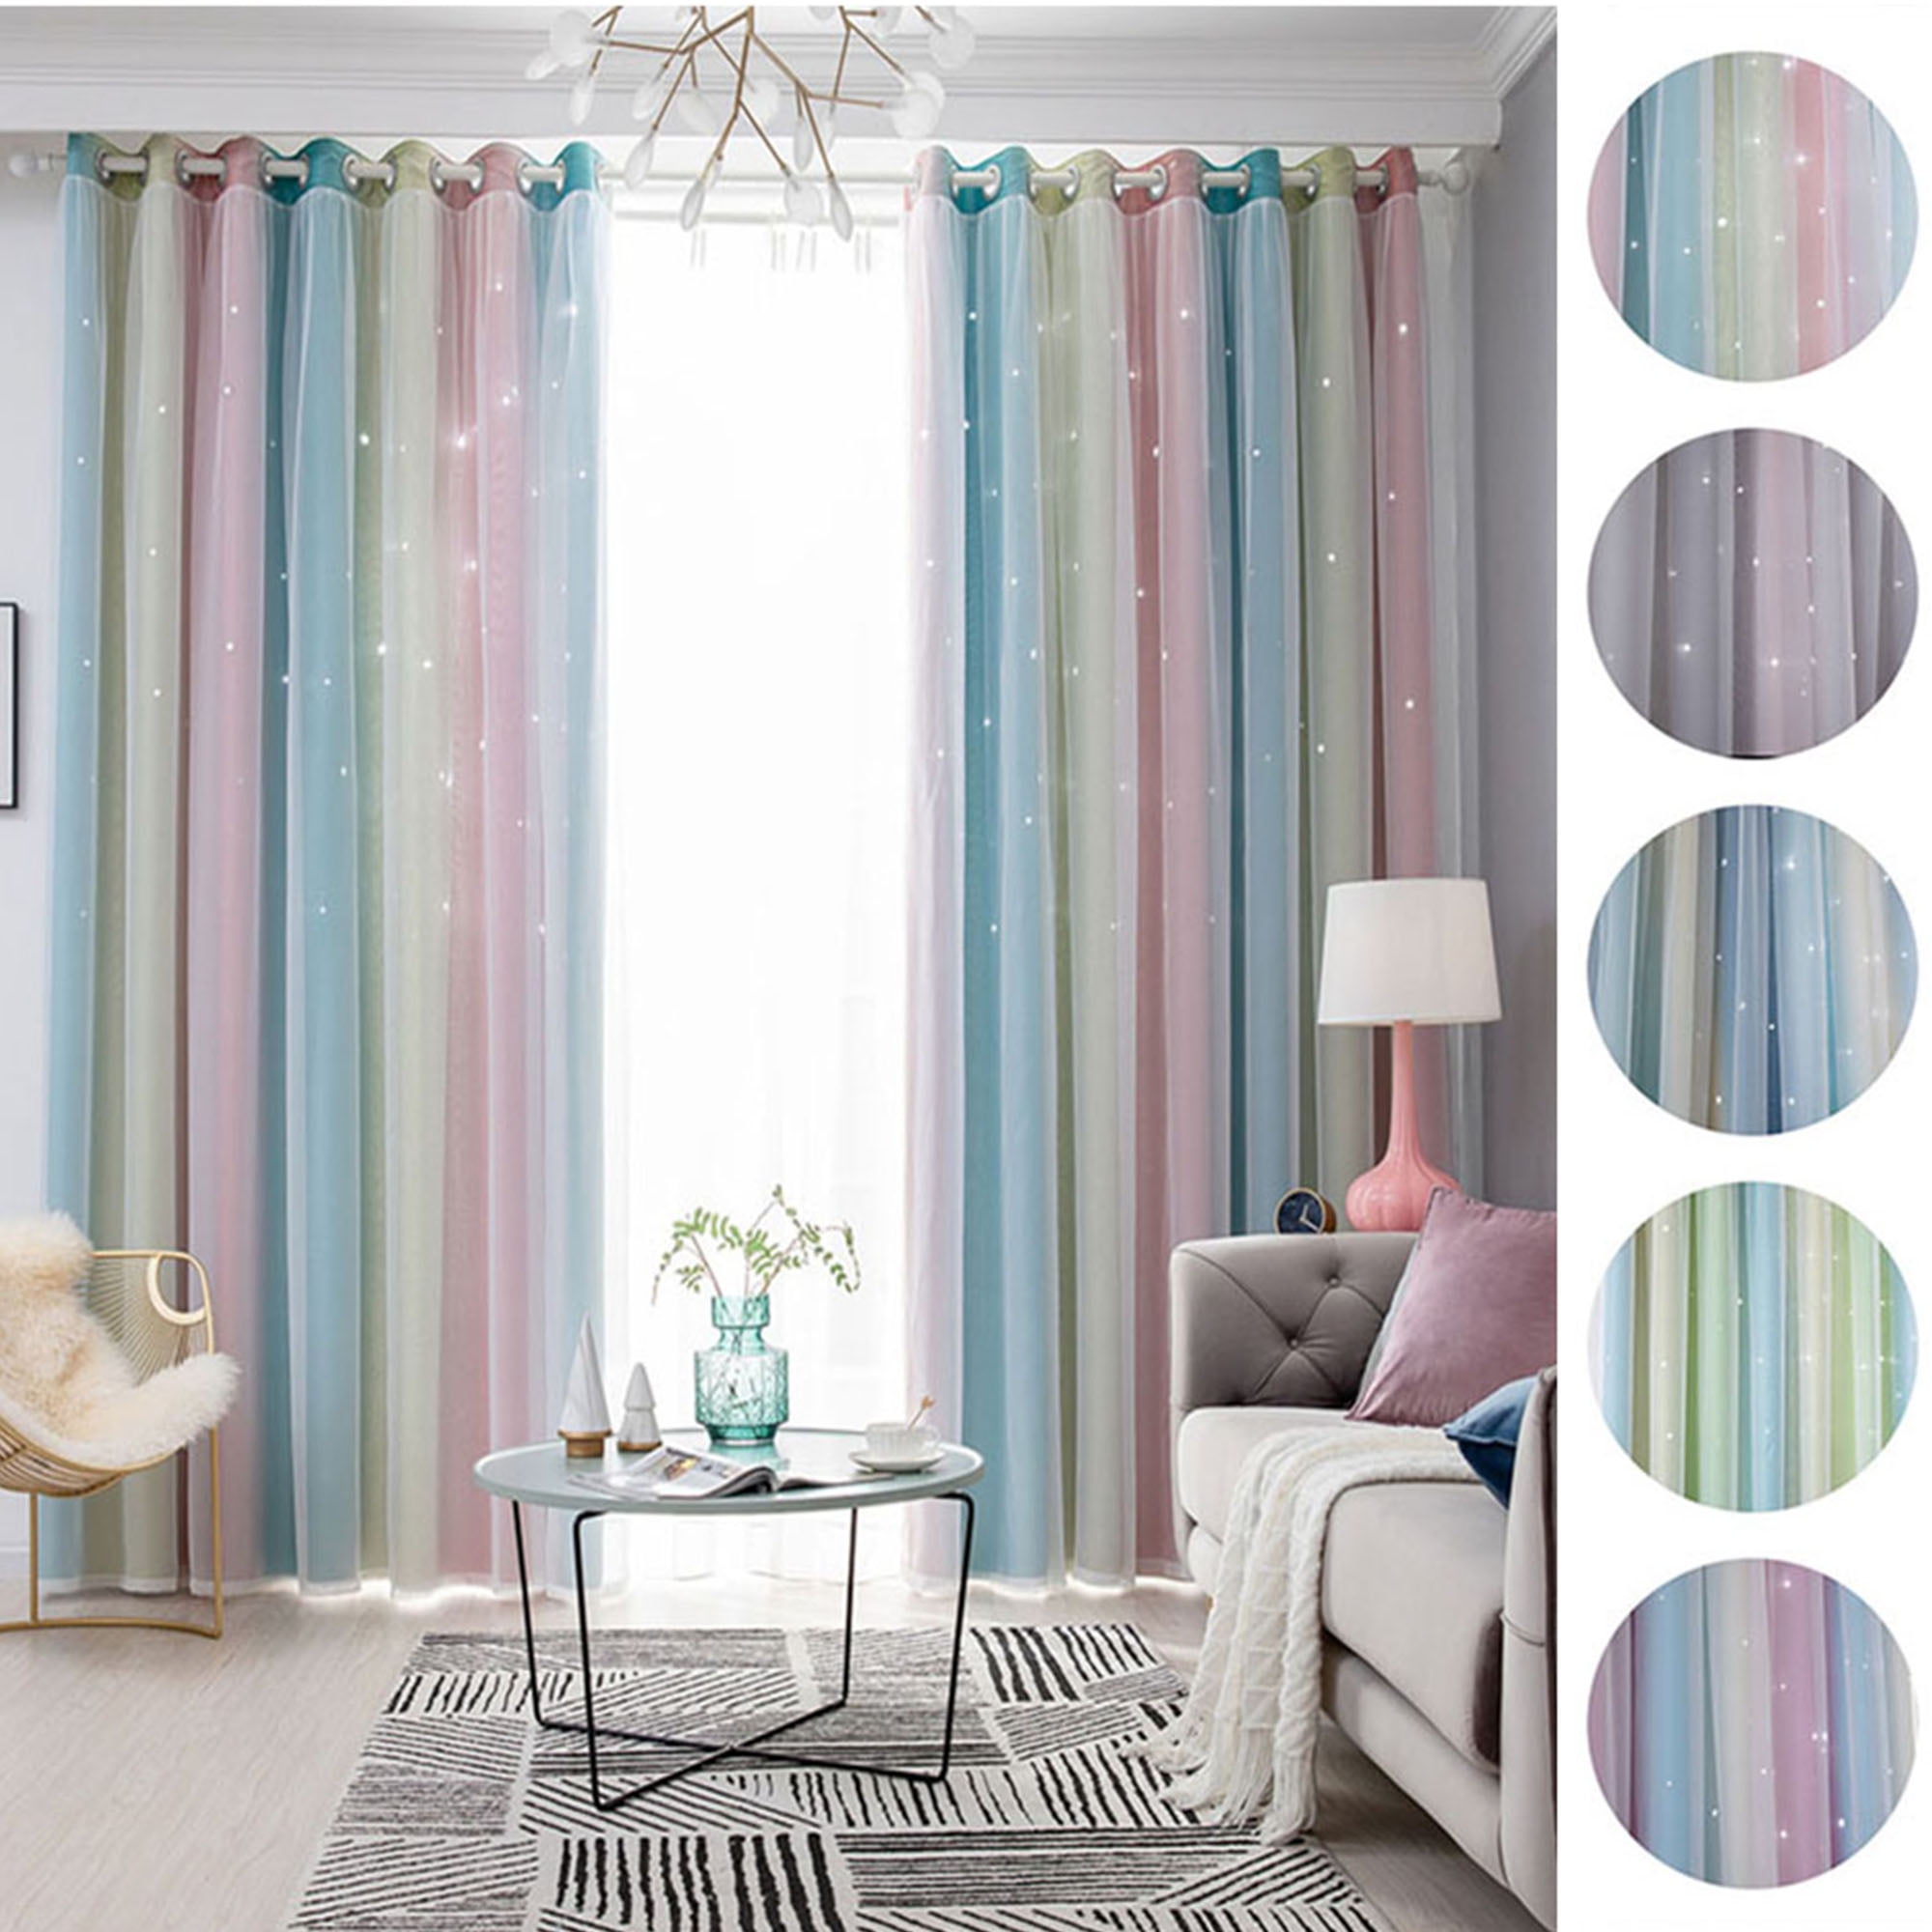 Eyelet Gradient 2 Layer Blackout Curtains + Mesh Starry